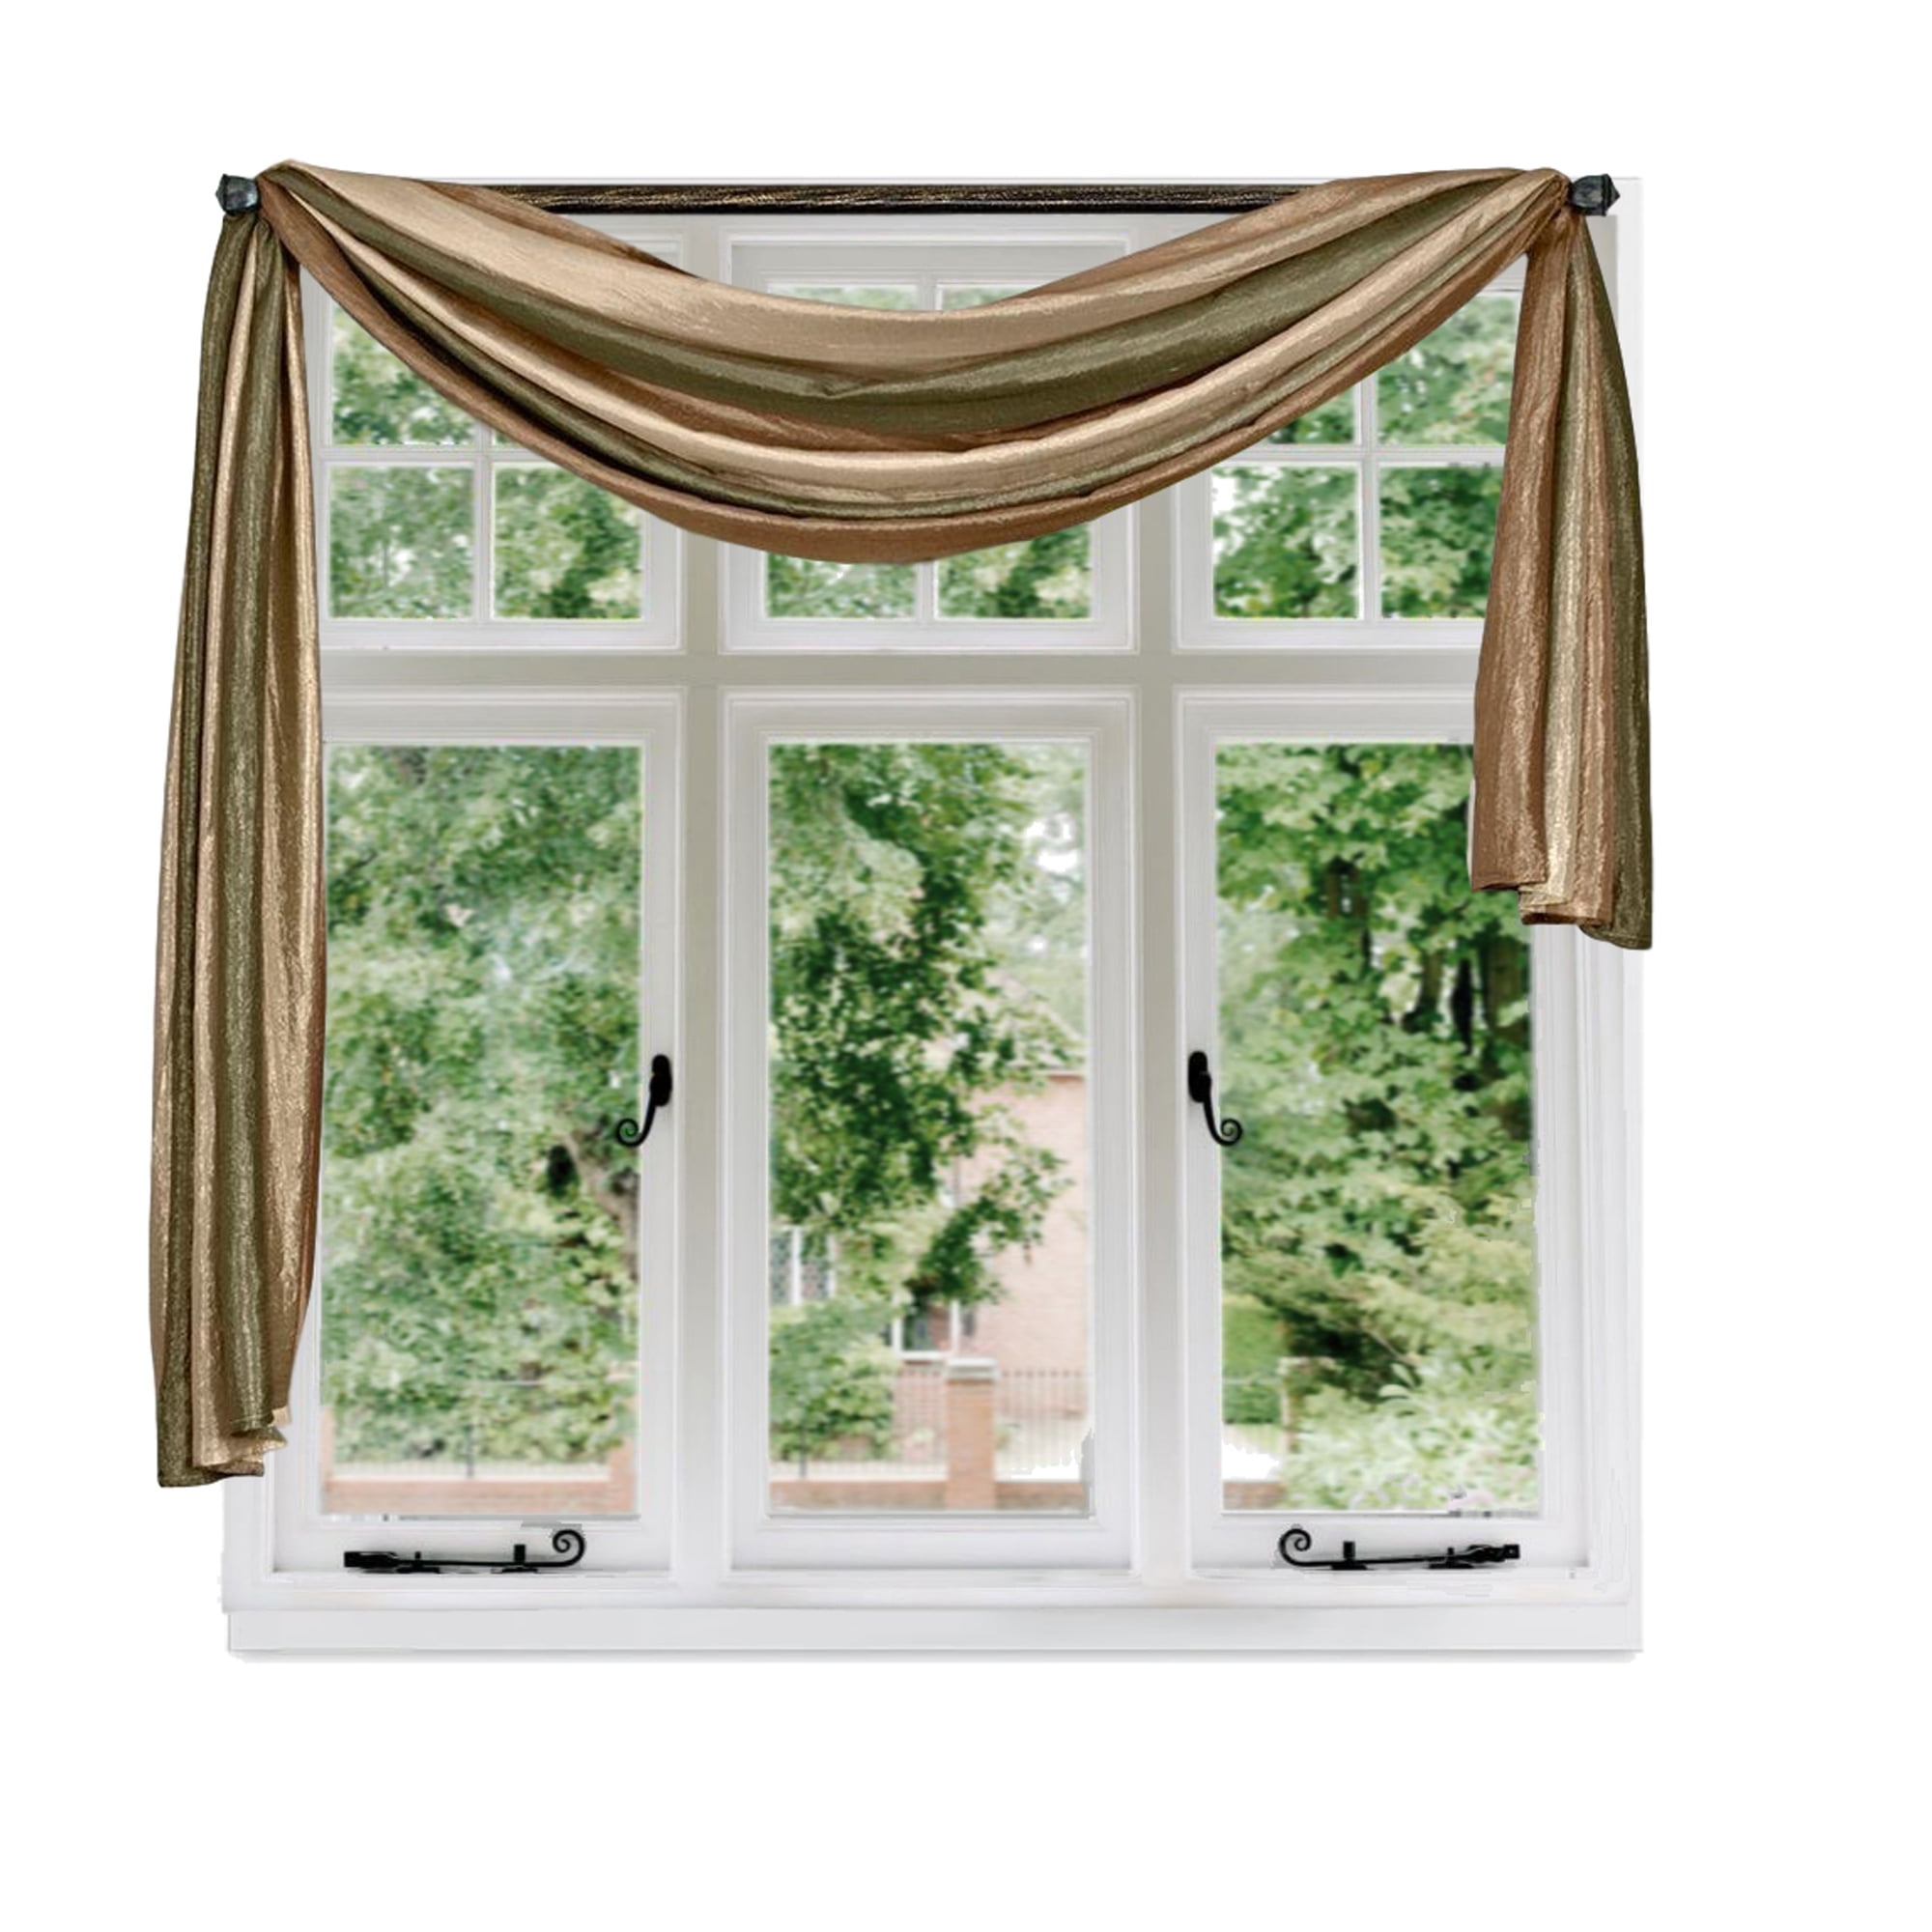 Woven Trends Ombre Curtains, Valances for Windows, Luxurious Scarf Valance,  Voile Semi-Sheer Window Curtains, Livingroom, Bedroom or Kitchen, 144